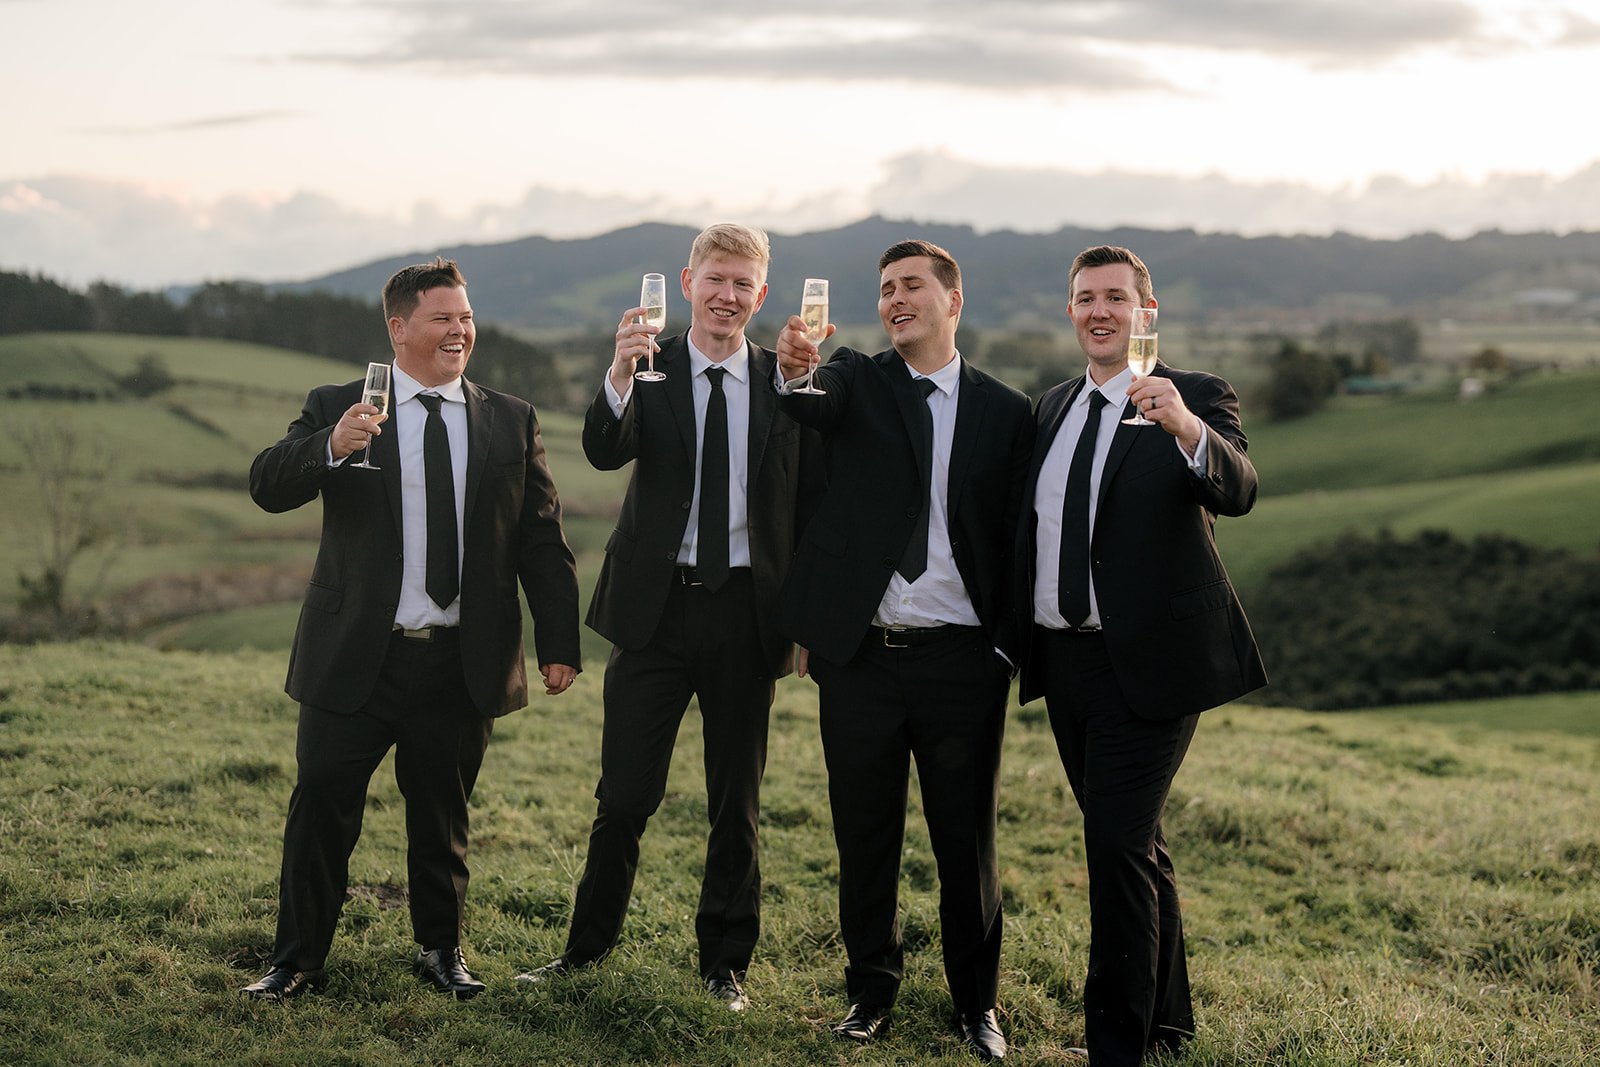 kauri-bay-boomrock-clevedon-top-auckland-wedding-phtographer-photography-videography-film-new-zealand-NZ-best-farm-venue-intimate-winter-hill-dear-white-productions (547).jpg